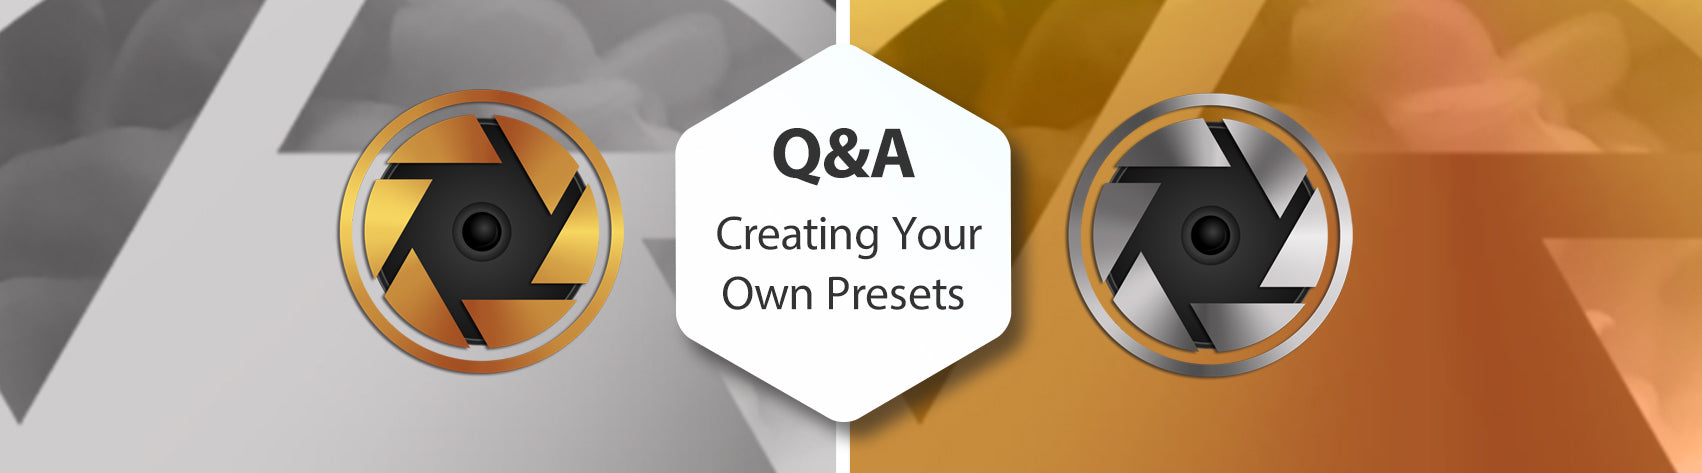 Q&A - Creating Your Own Presets